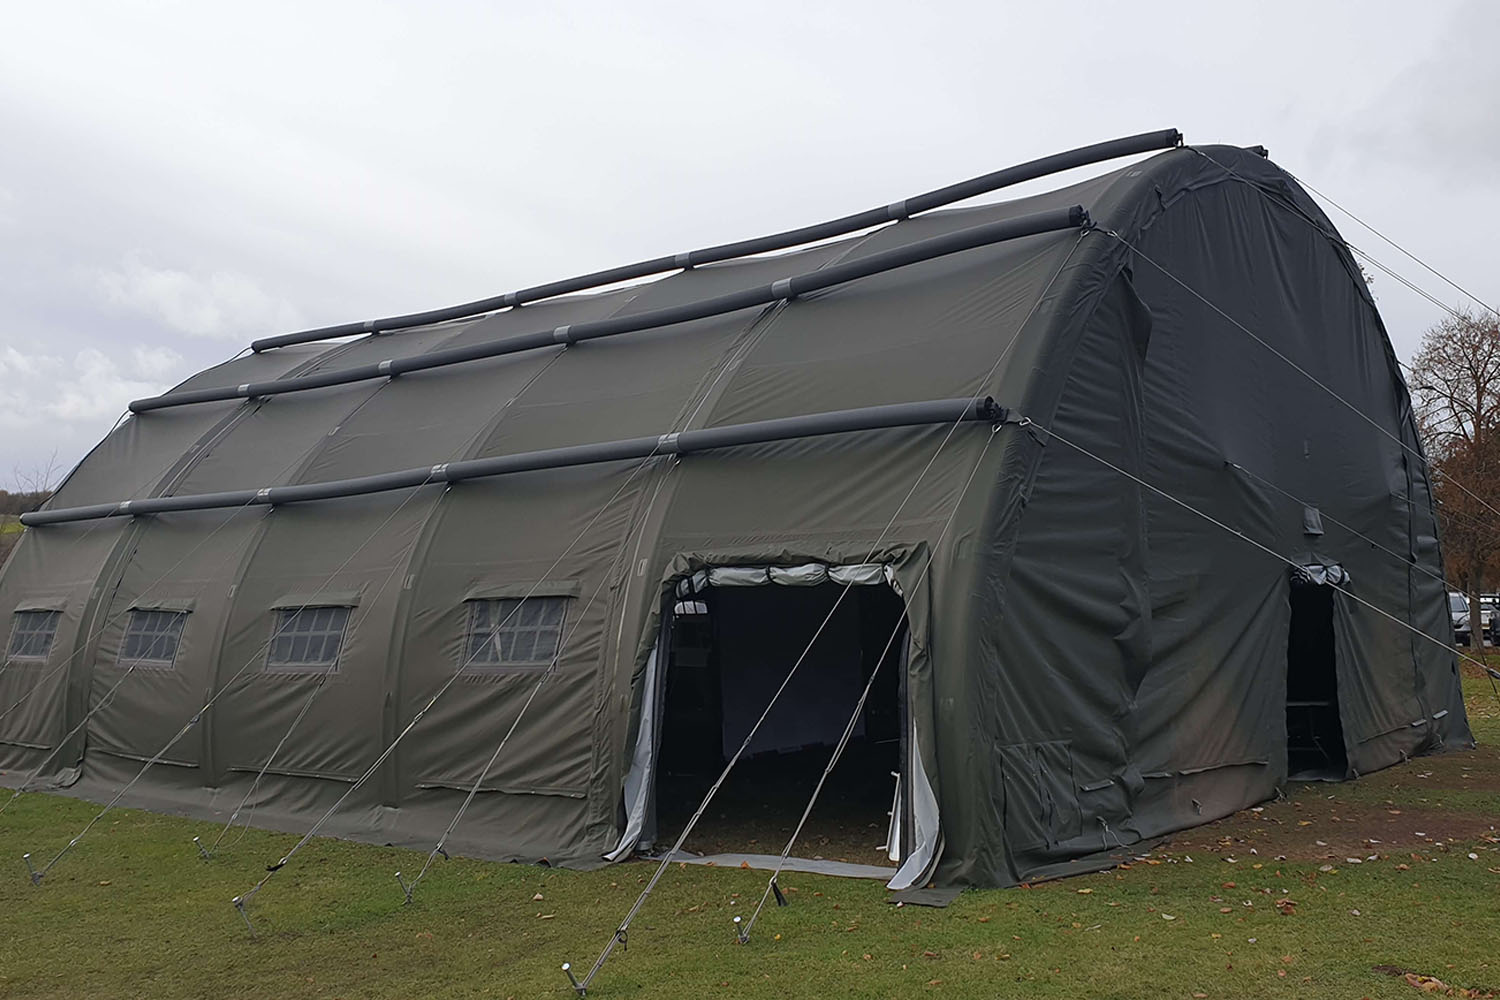 Rapid deploy patented inflatable military tent Nixus RIBS